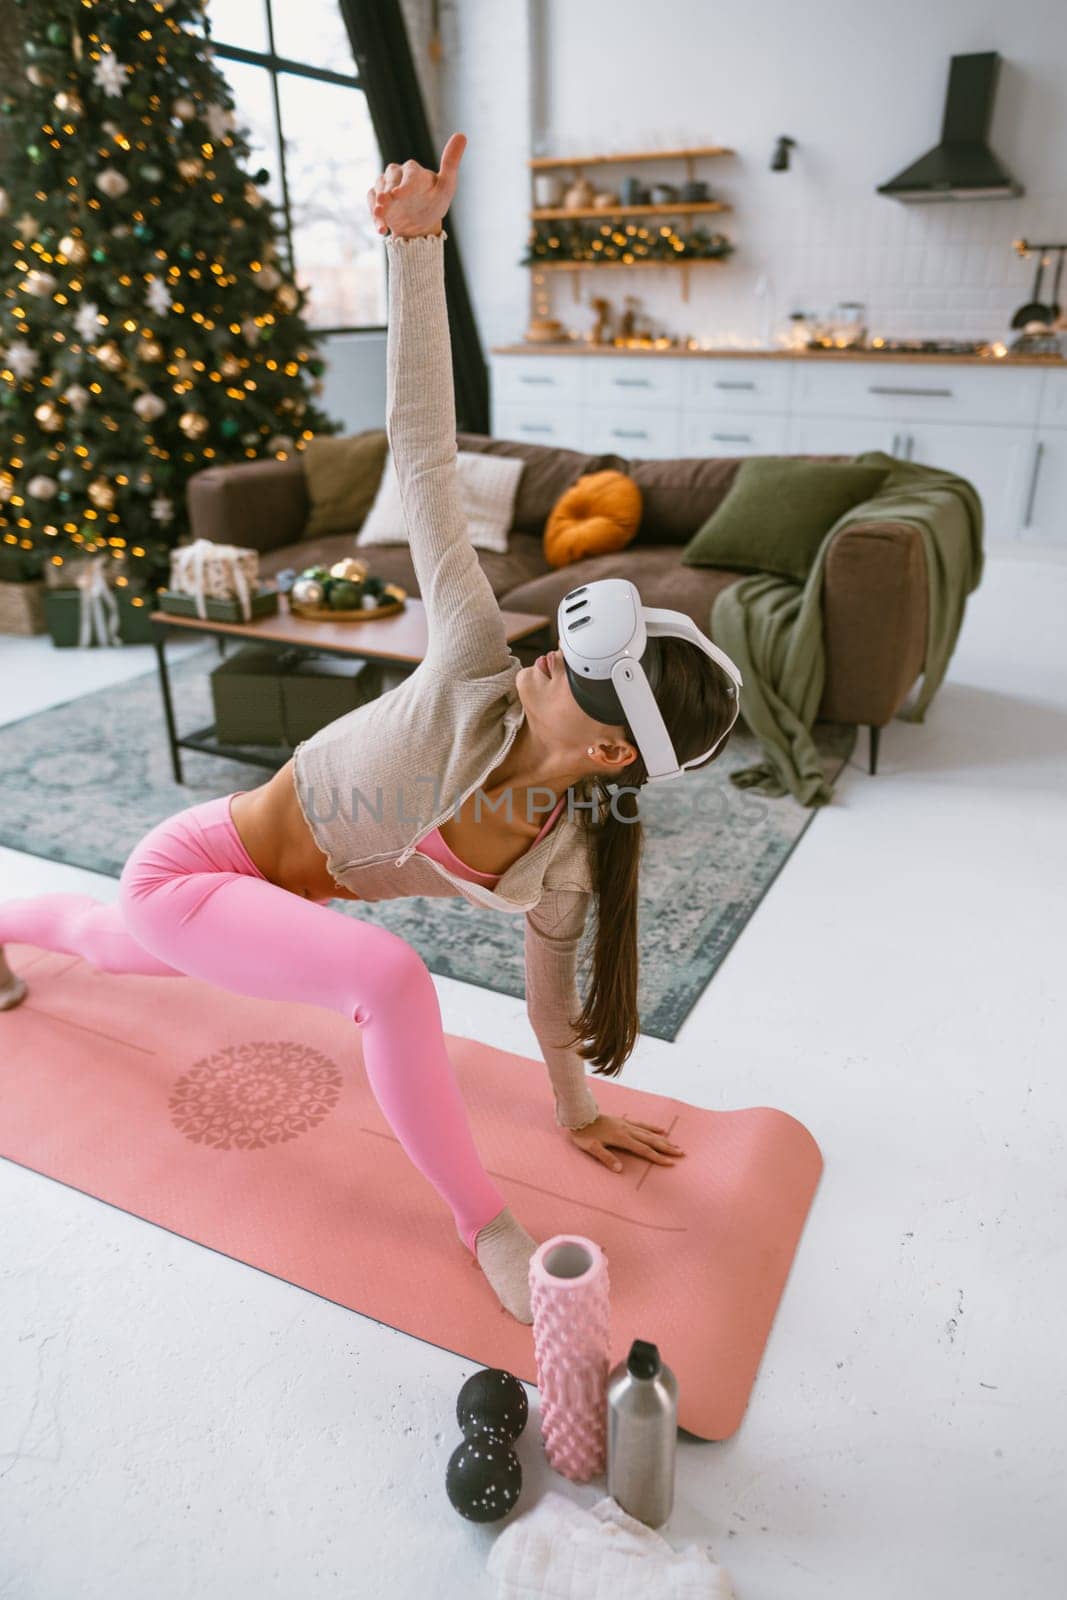 Wearing workout clothes and a virtual reality headset, the fashionable young woman engages in yoga exercises next to a Christmas tree. High quality photo